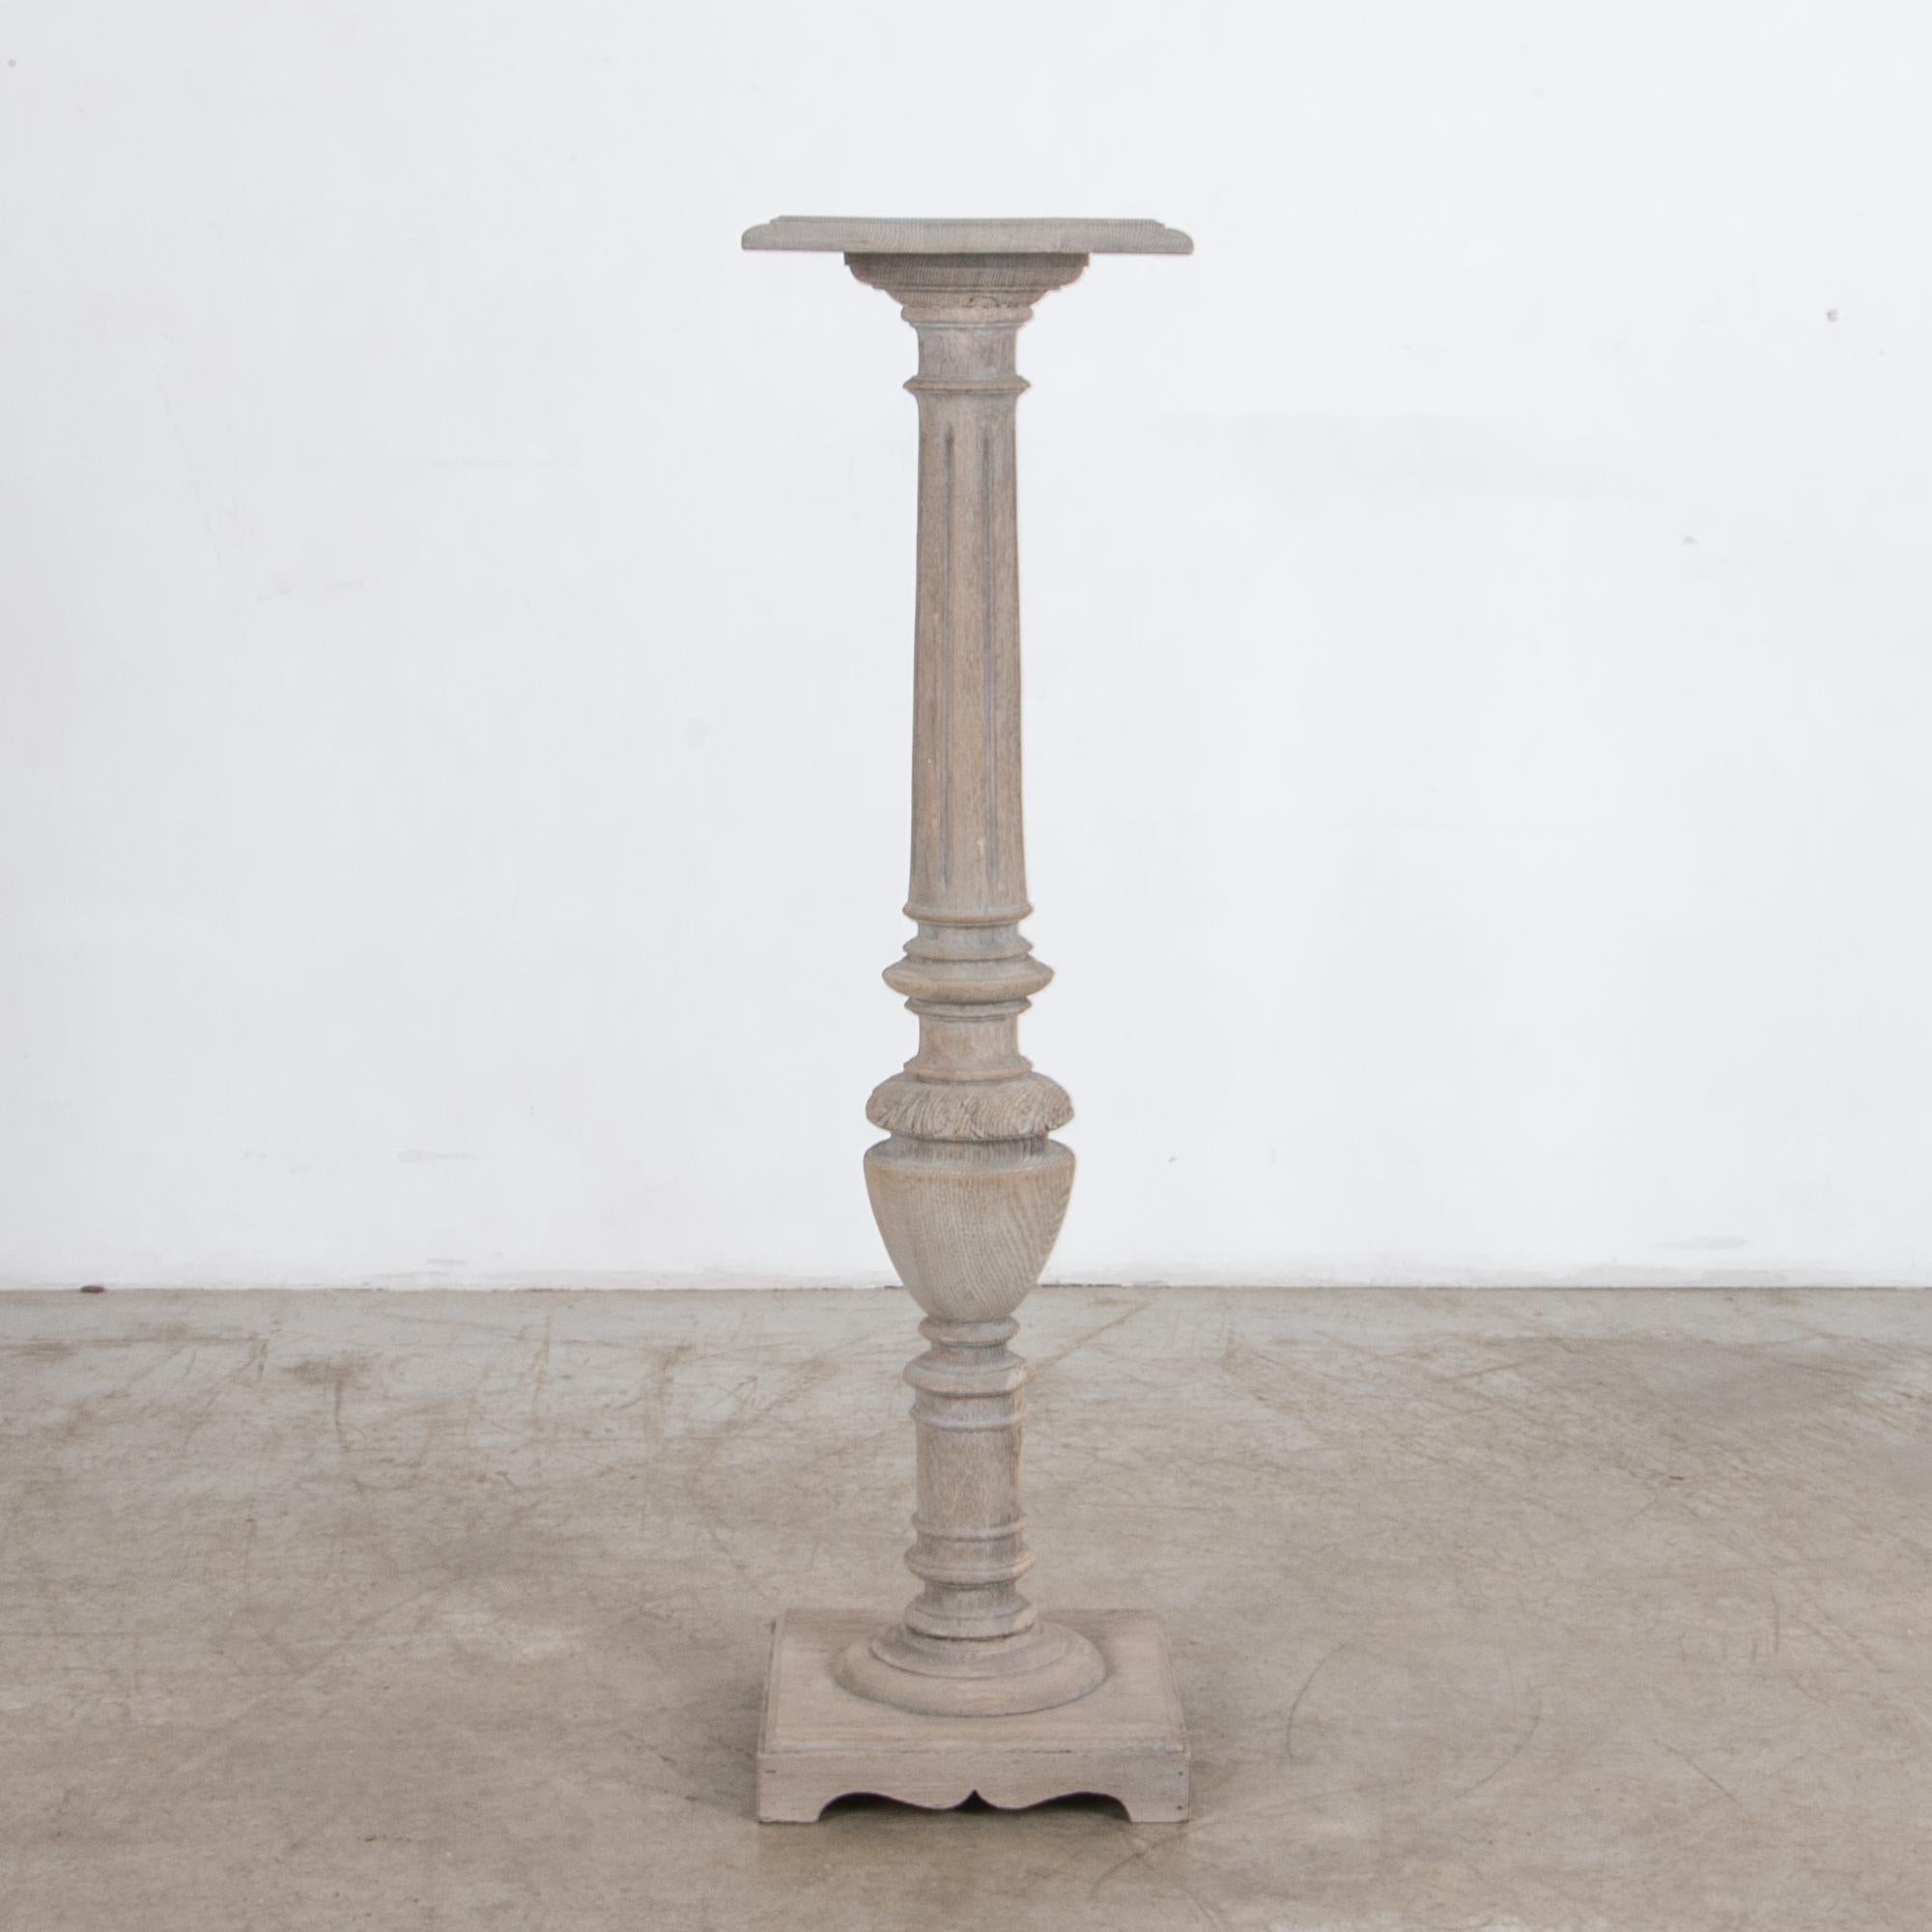 An elegant perch. A turned wood column of Cerused oak, originally from circa 1900 France, updated with a contemporary finish. With a characteristic carved motif, floral elements mix with geometric pattern, topped with a miniature square table and a